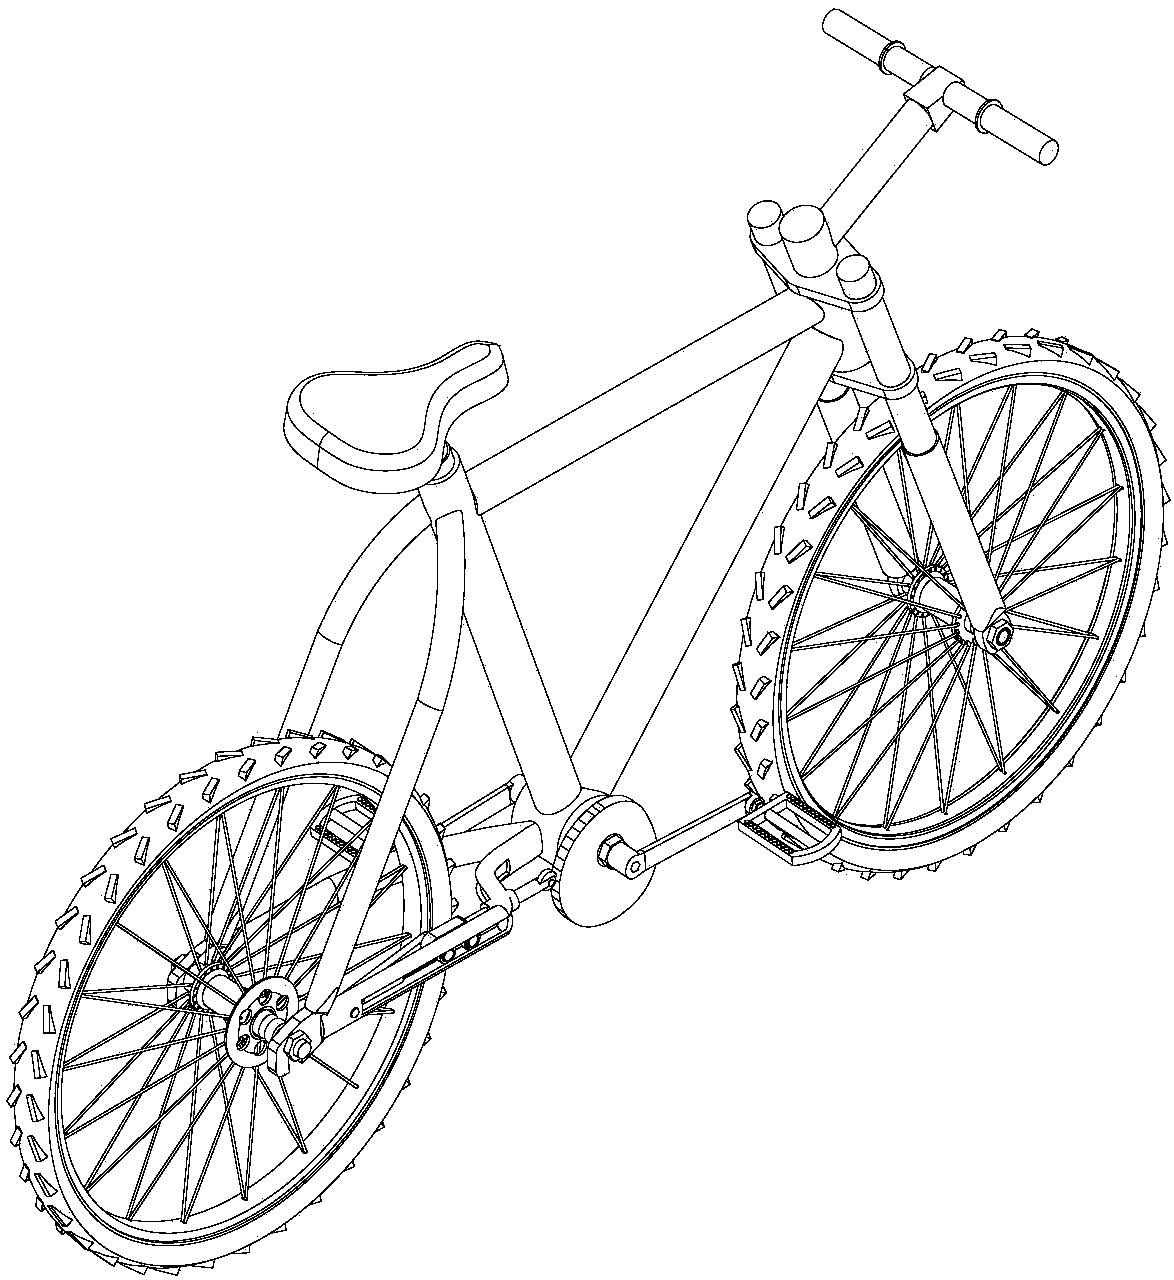 A Chainless Bicycle Based on Cam and Crank Slider Transmission